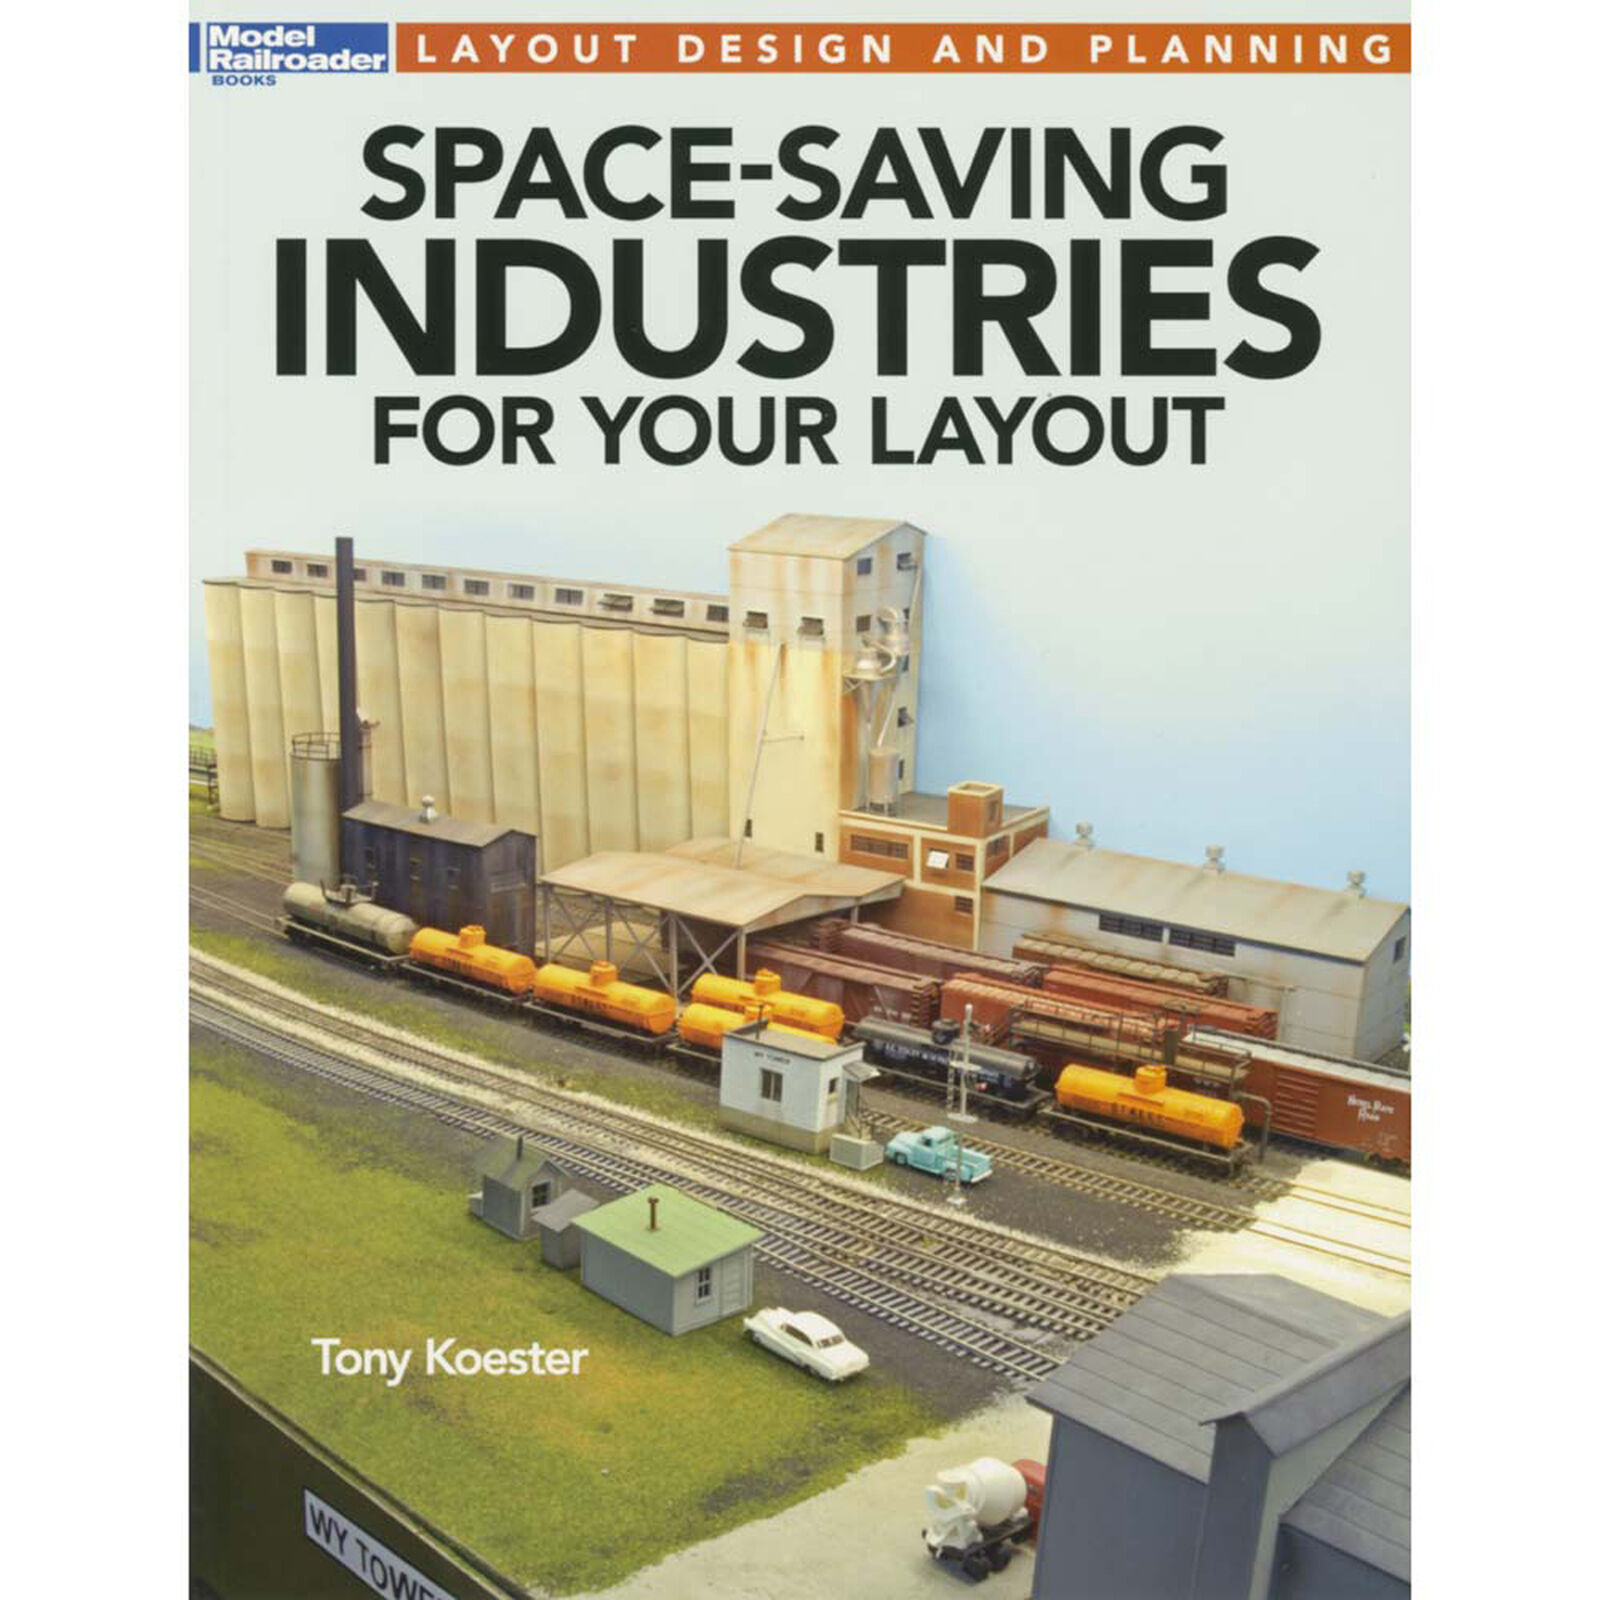 Space-Savcing Industries for your layout